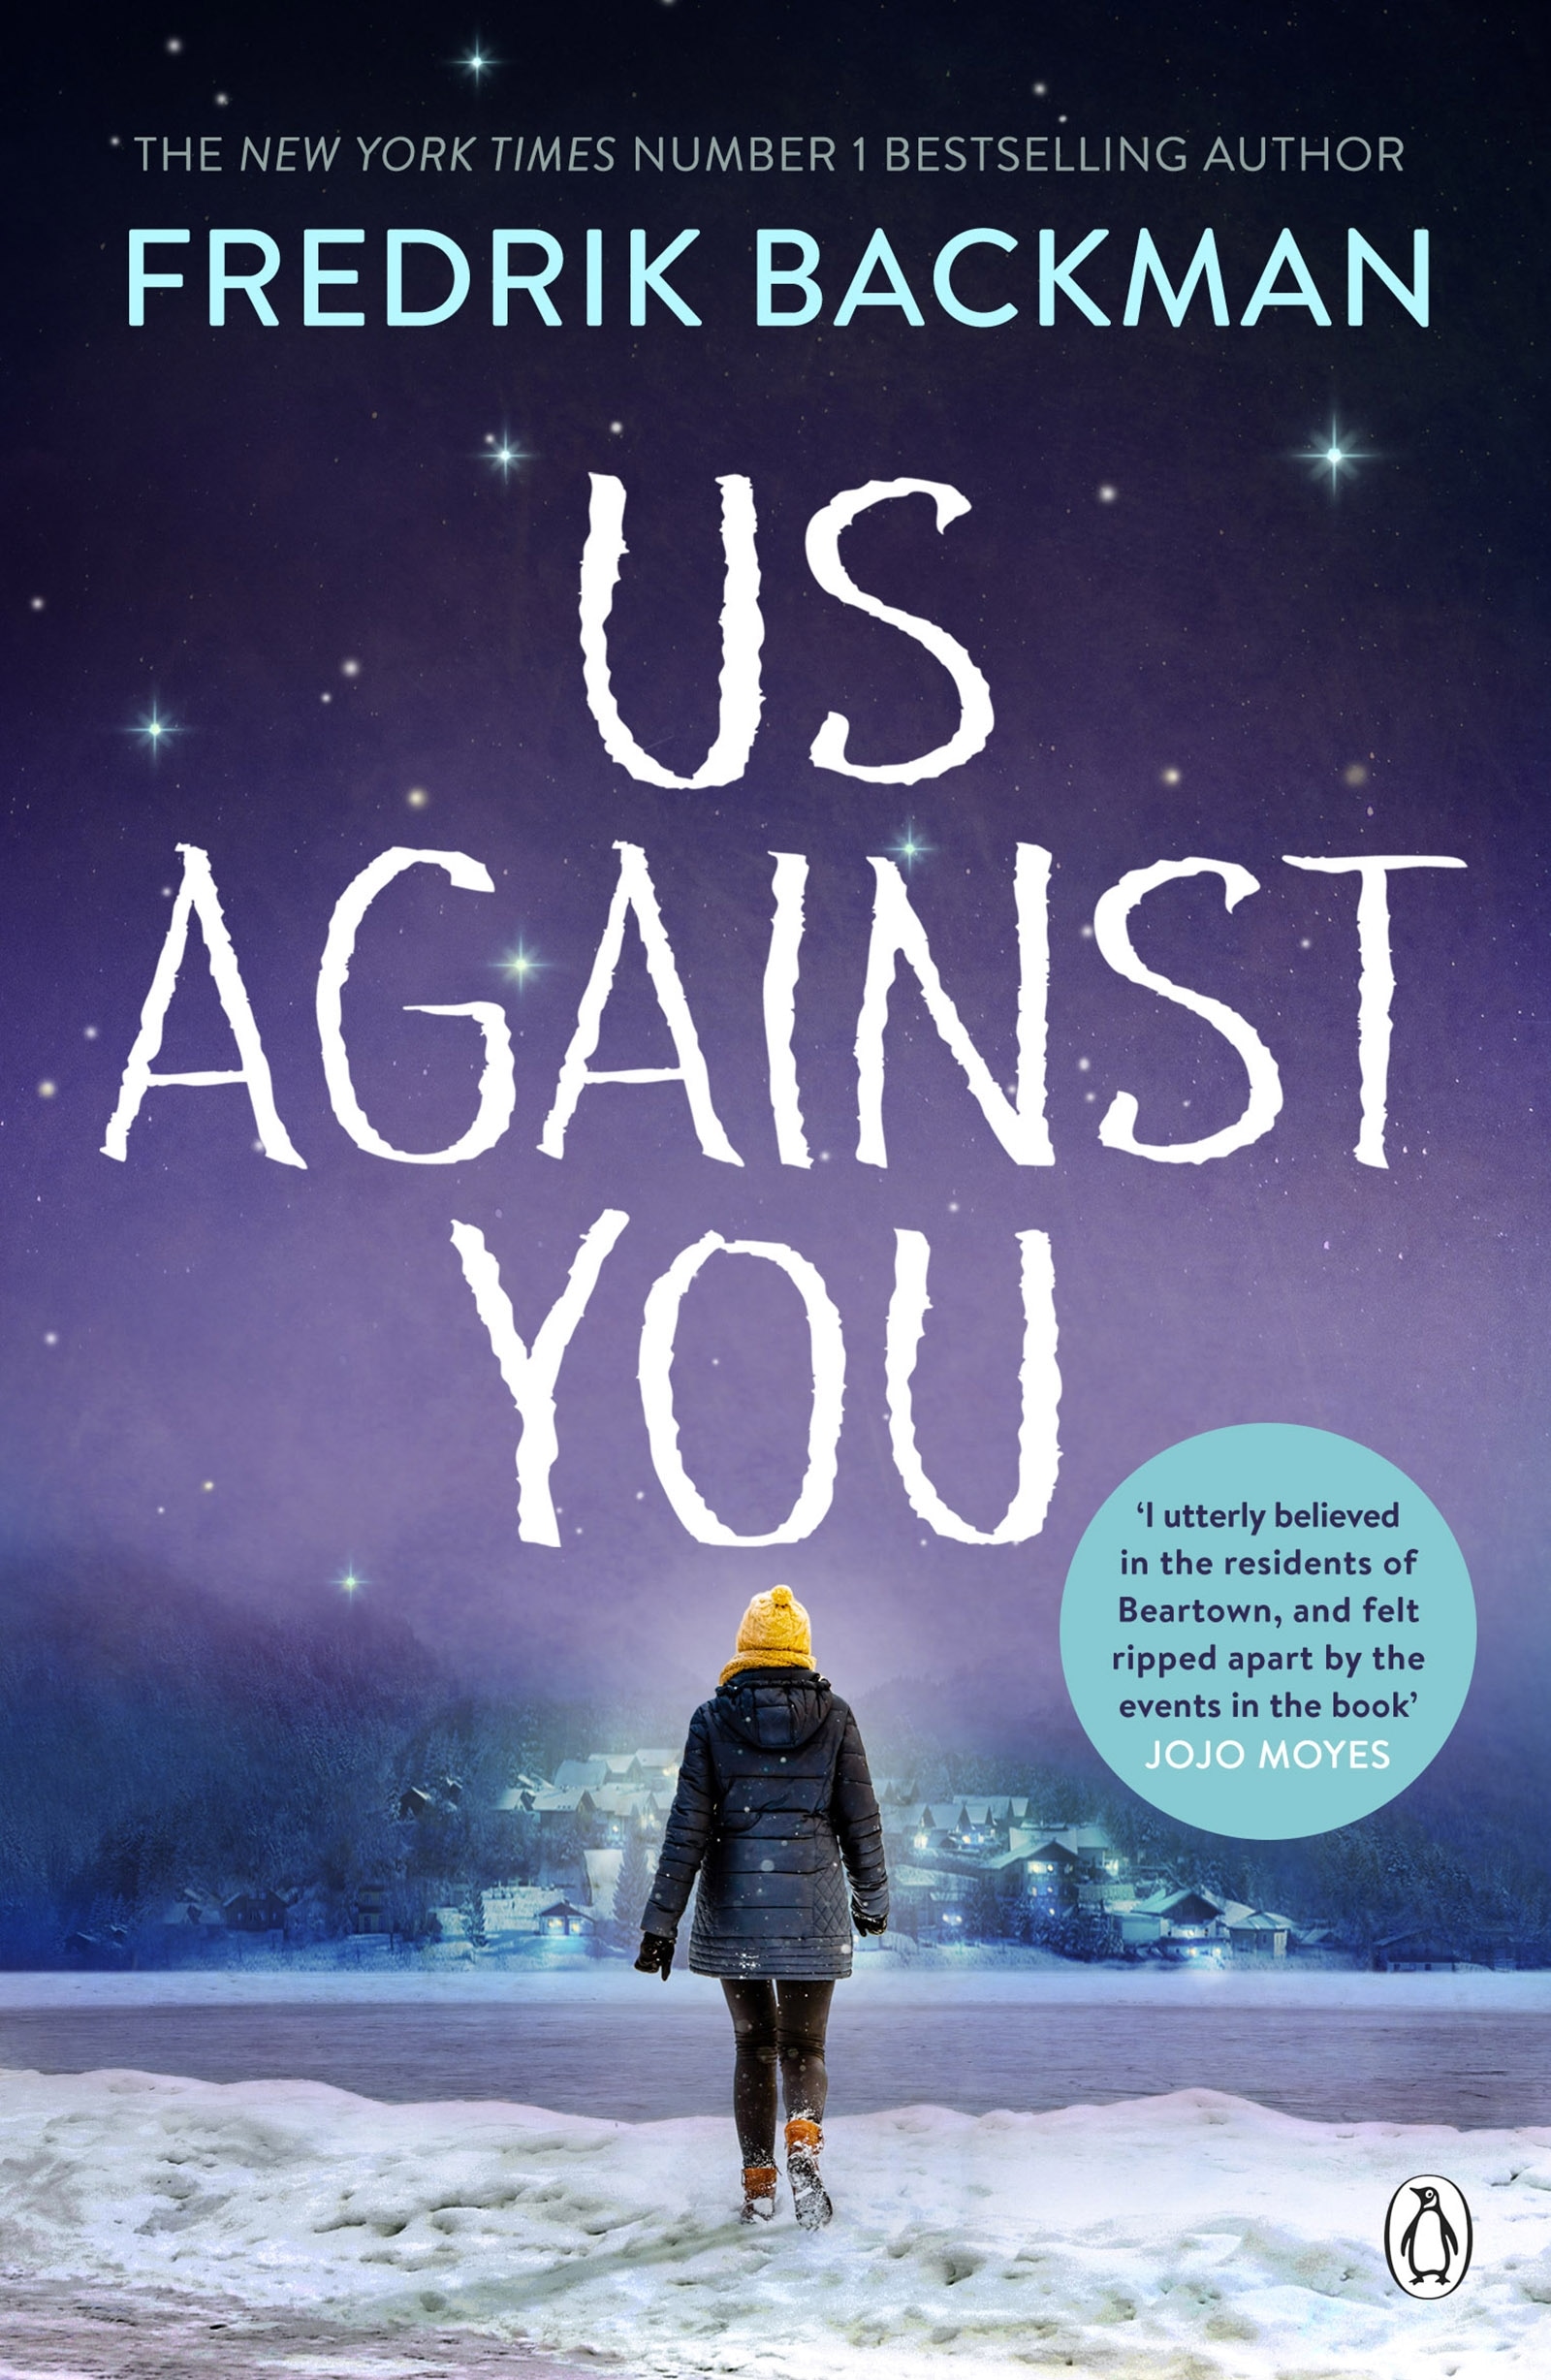 Book “Us Against You” by Fredrik Backman — May 2, 2019